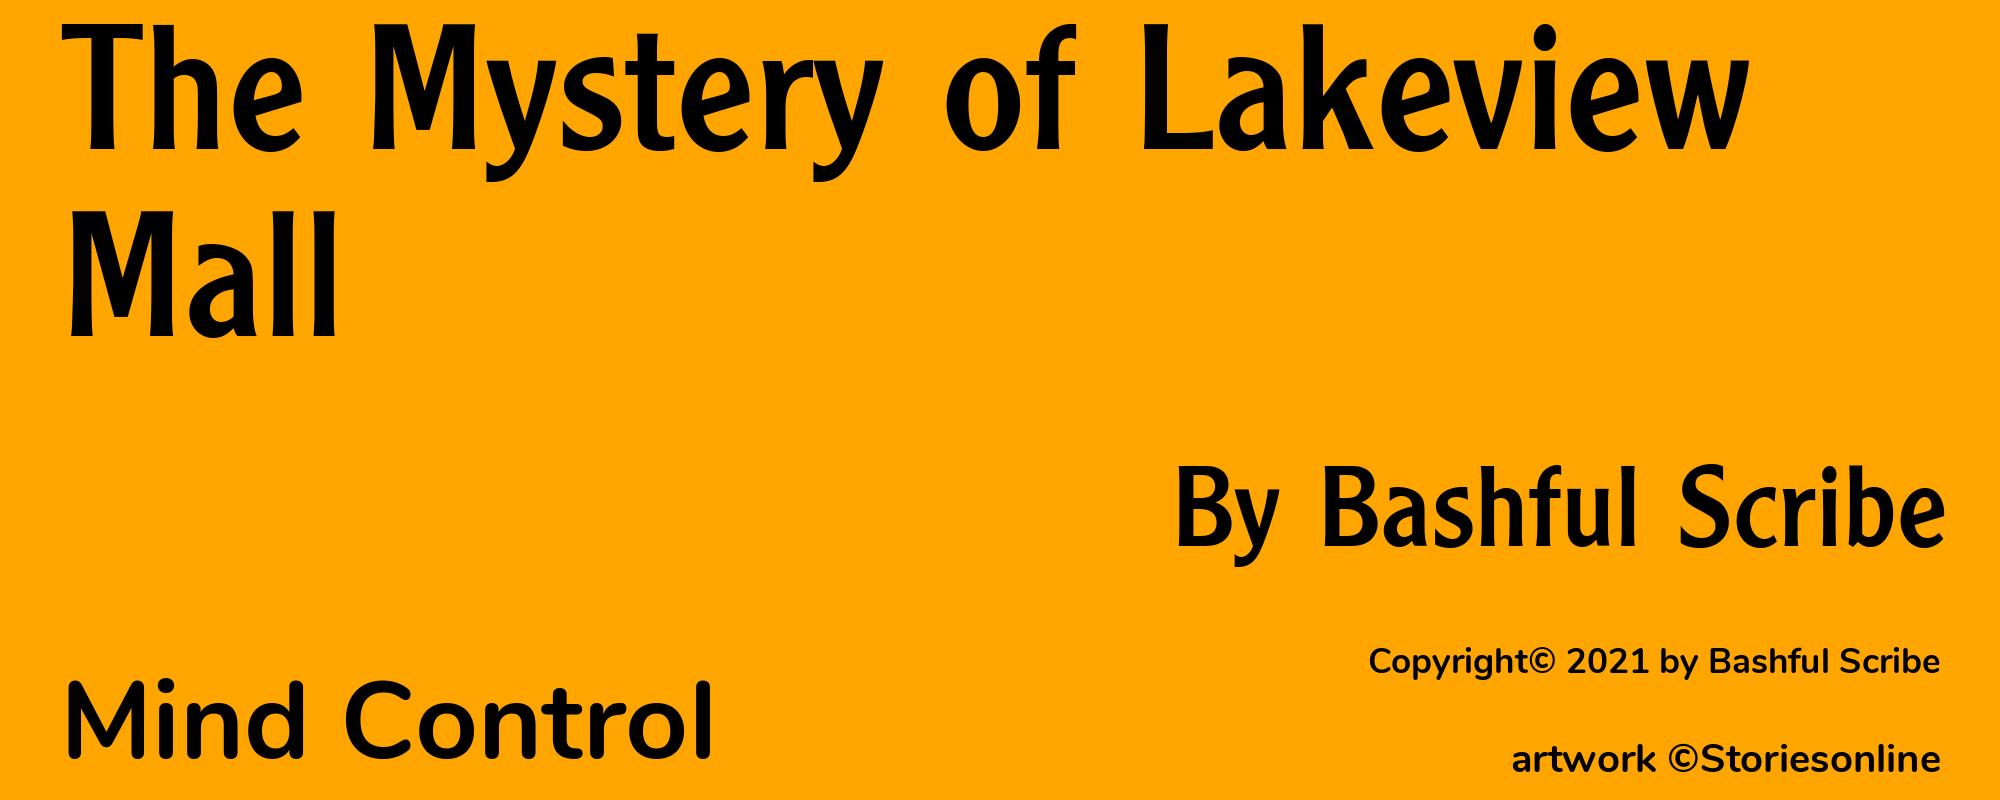 The Mystery of Lakeview Mall - Cover